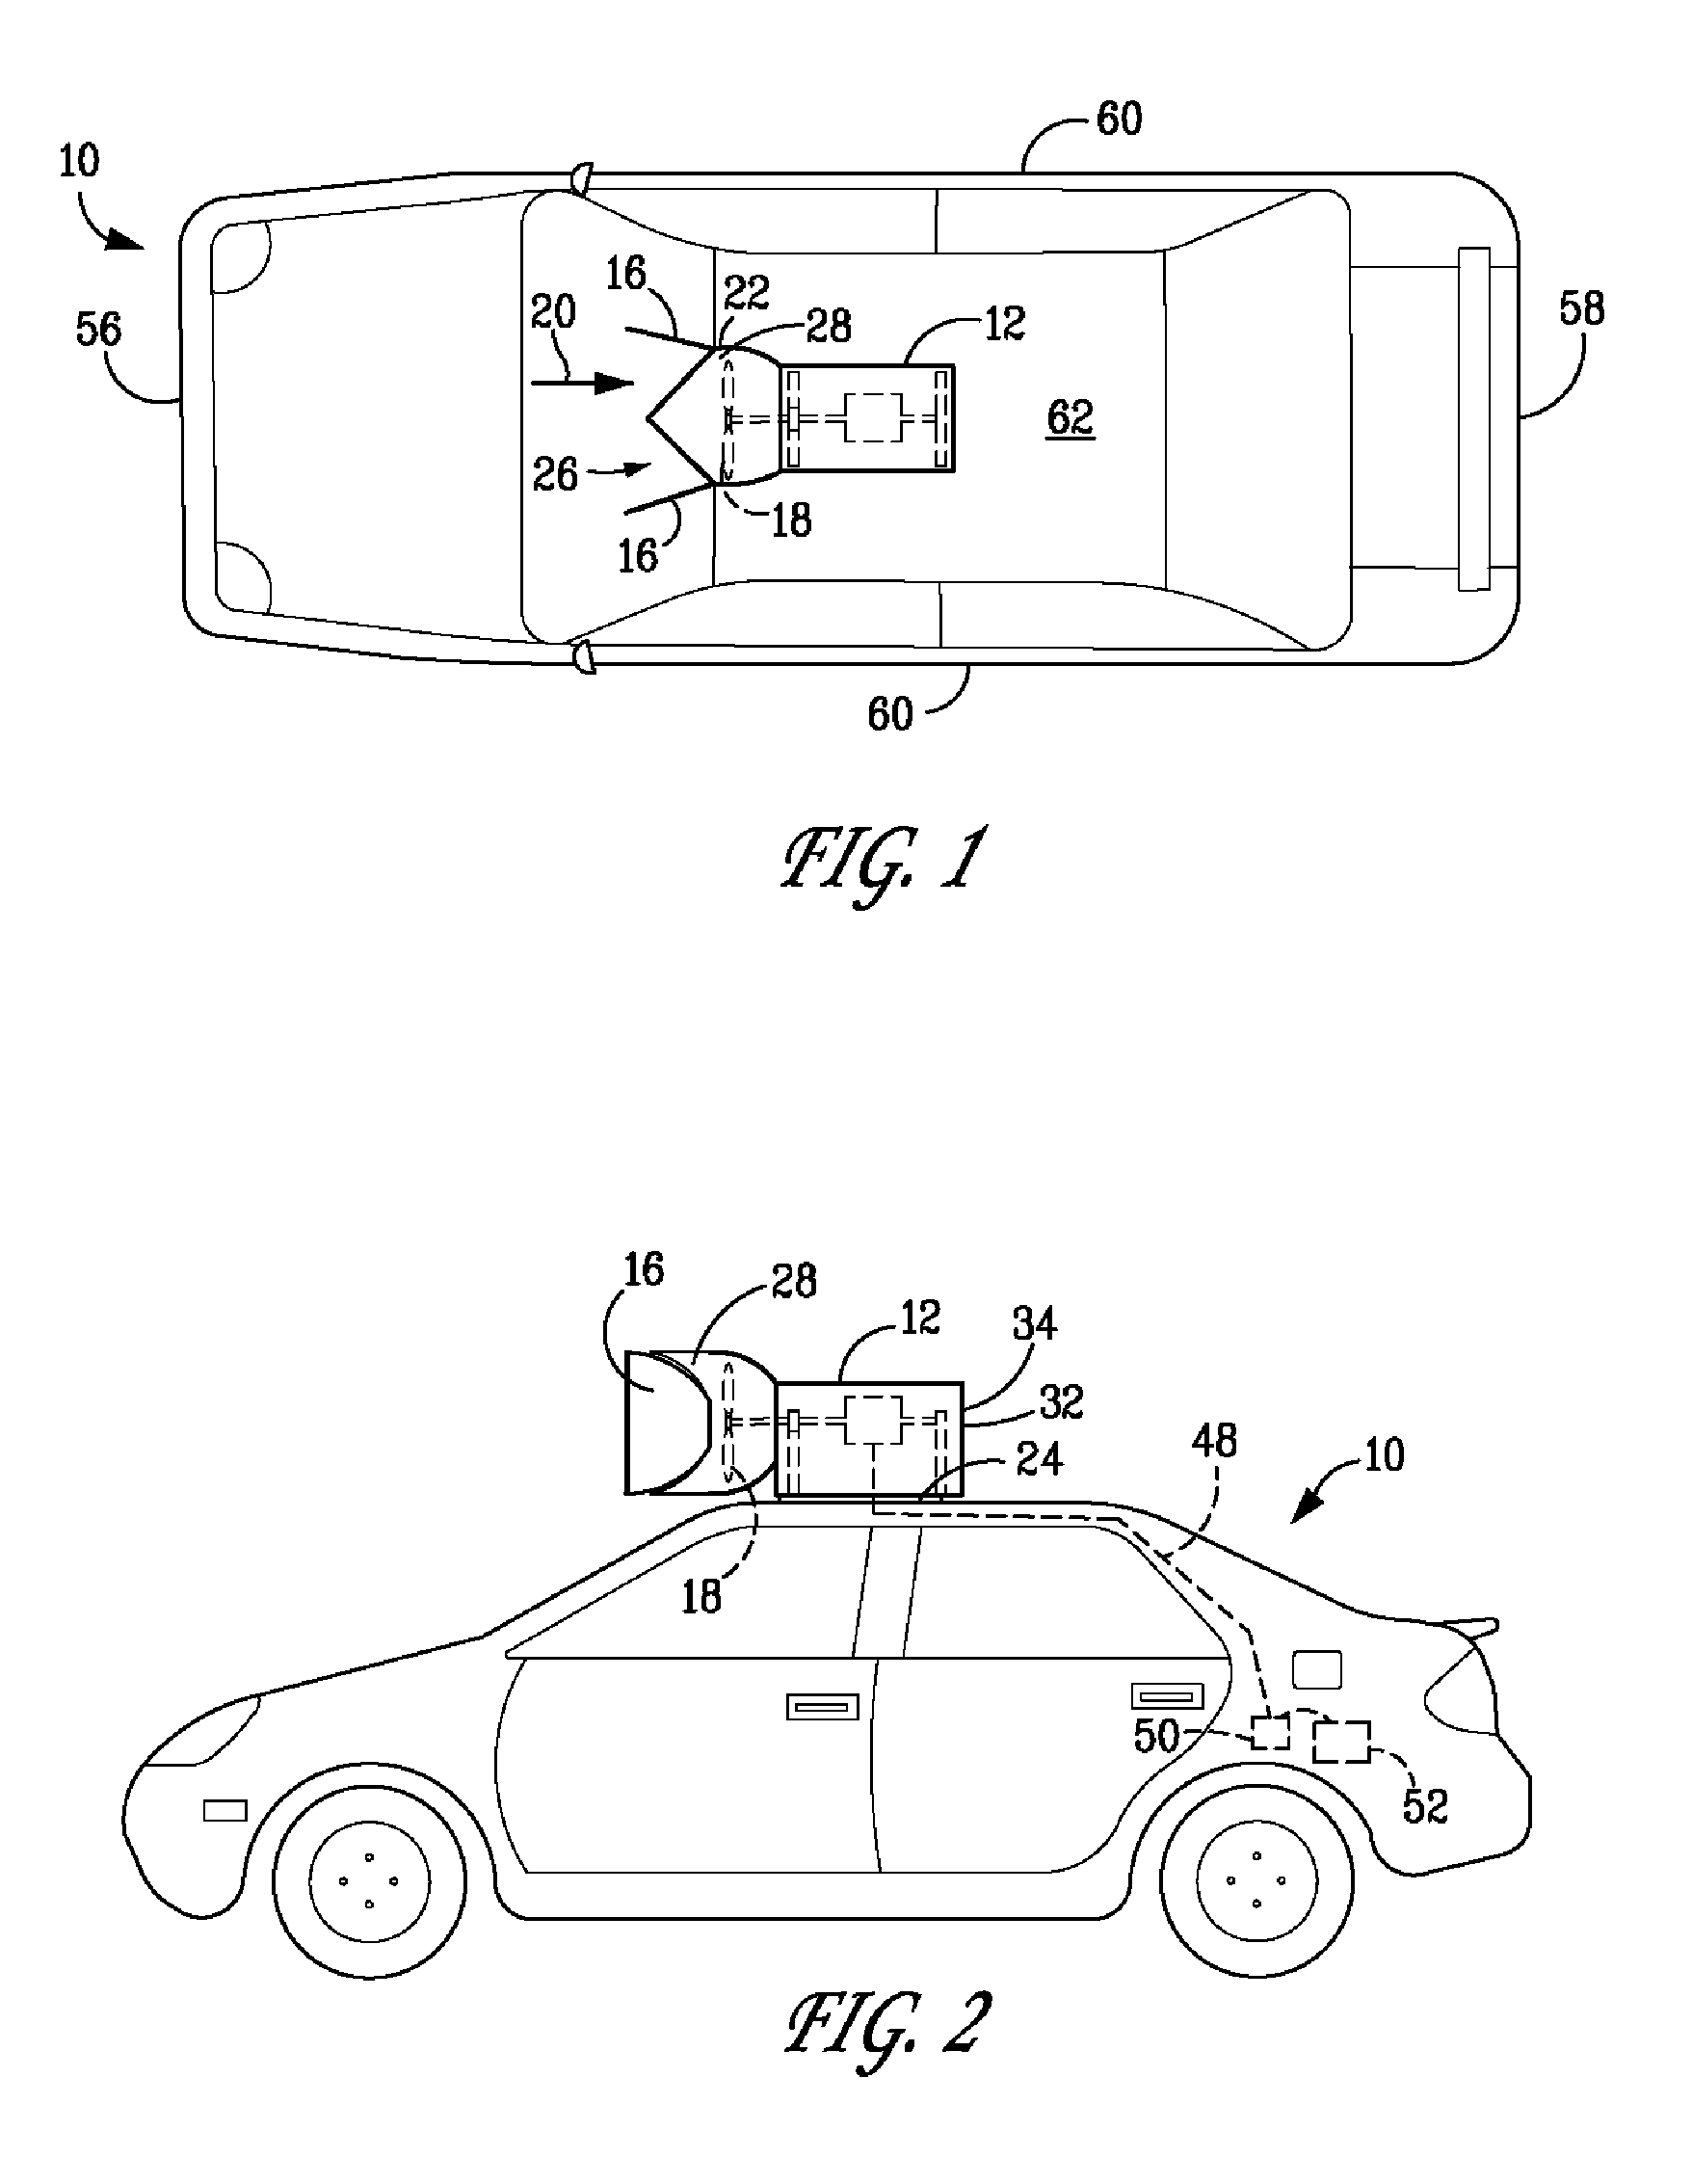 Wind driven generator for powered vehicles